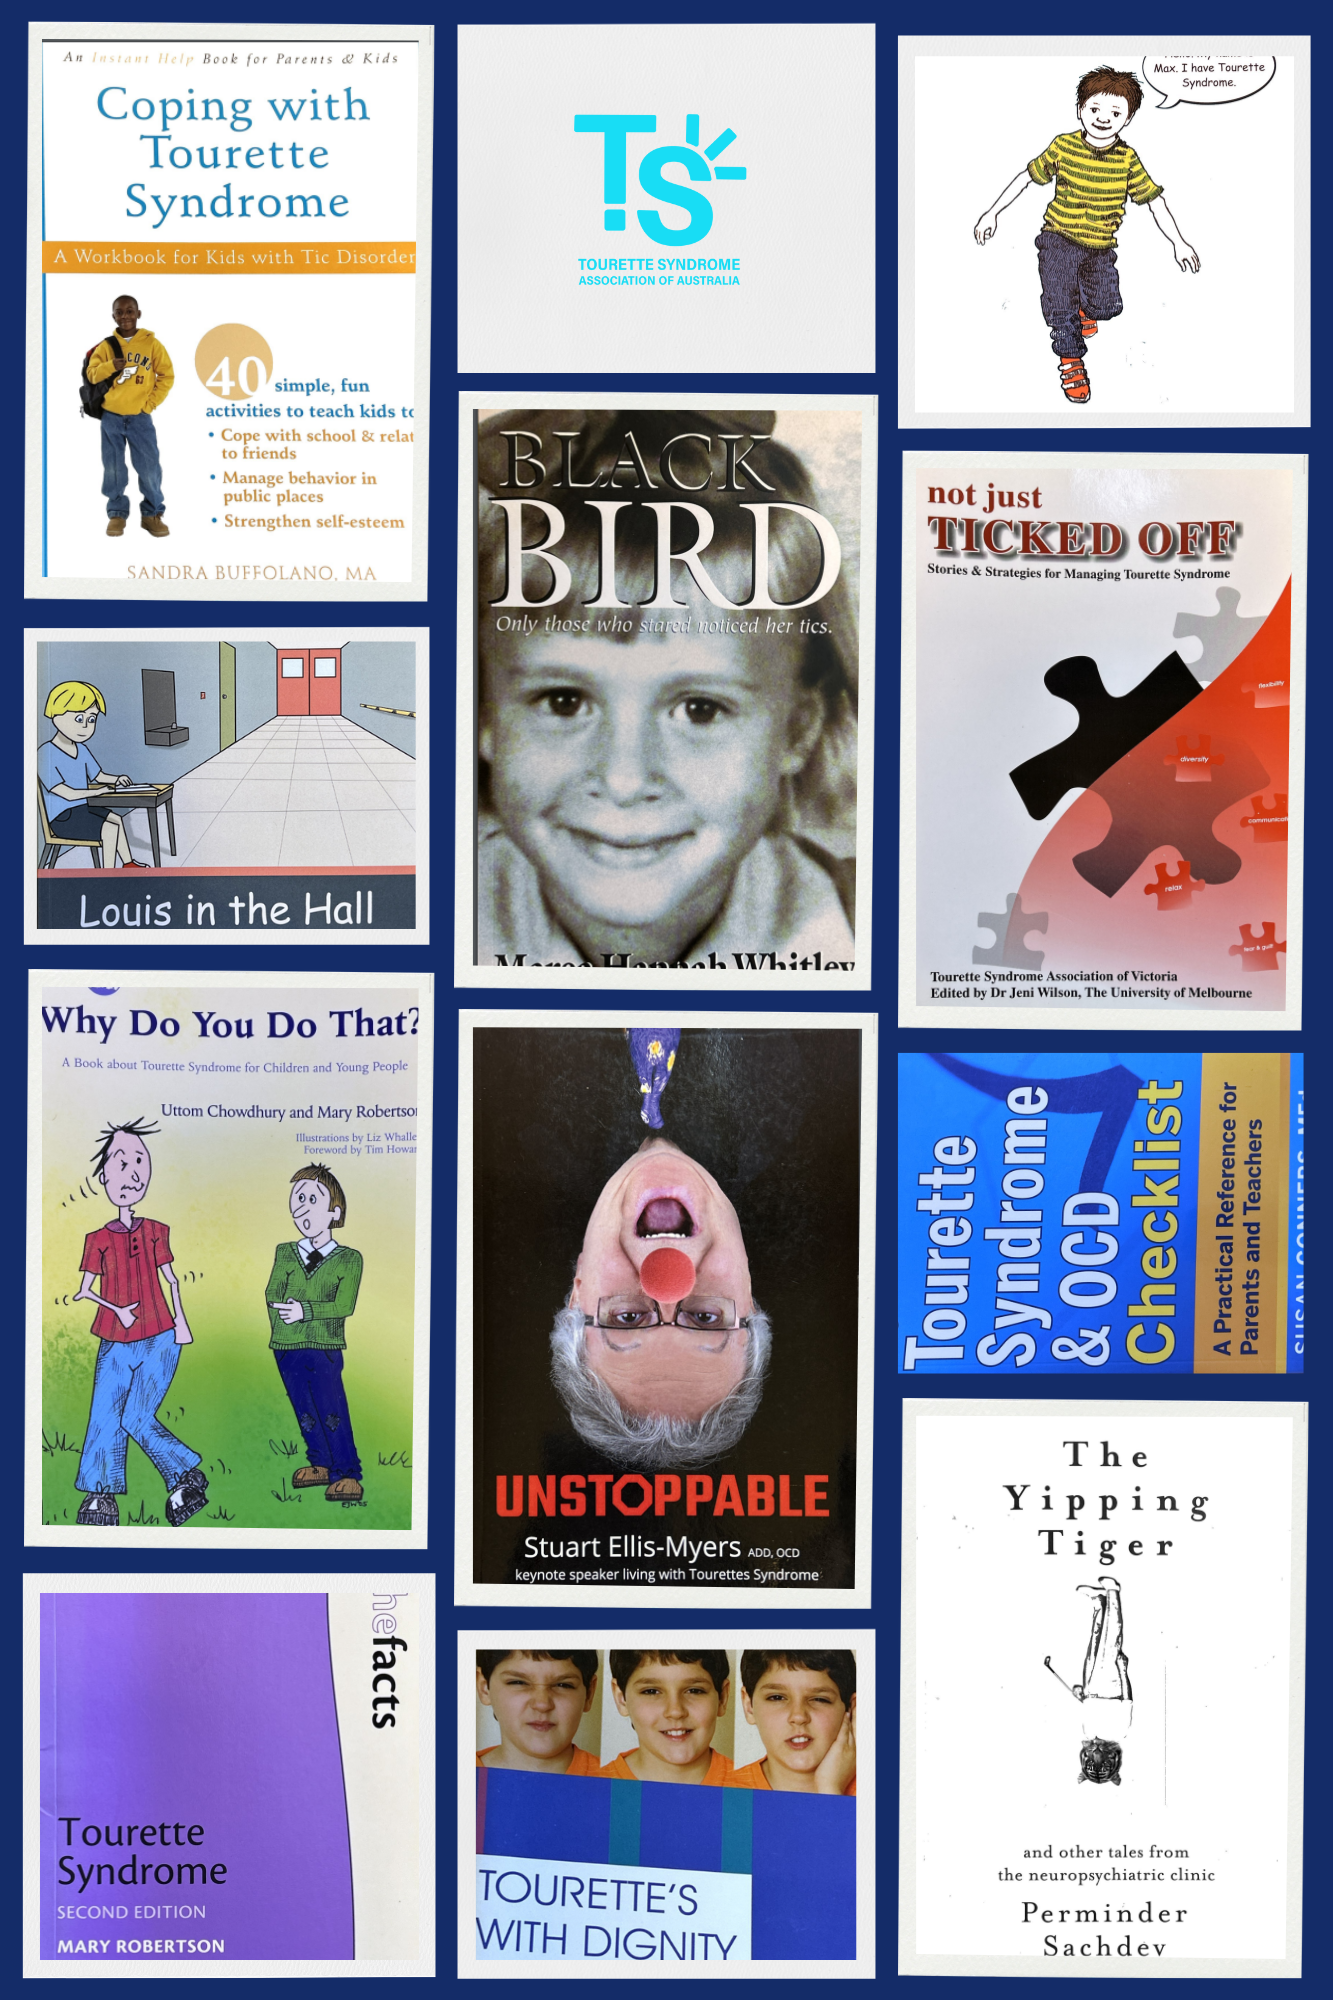 A collage of books about Tourette Syndrome with the Tourette Syndrome Association of Australia logo